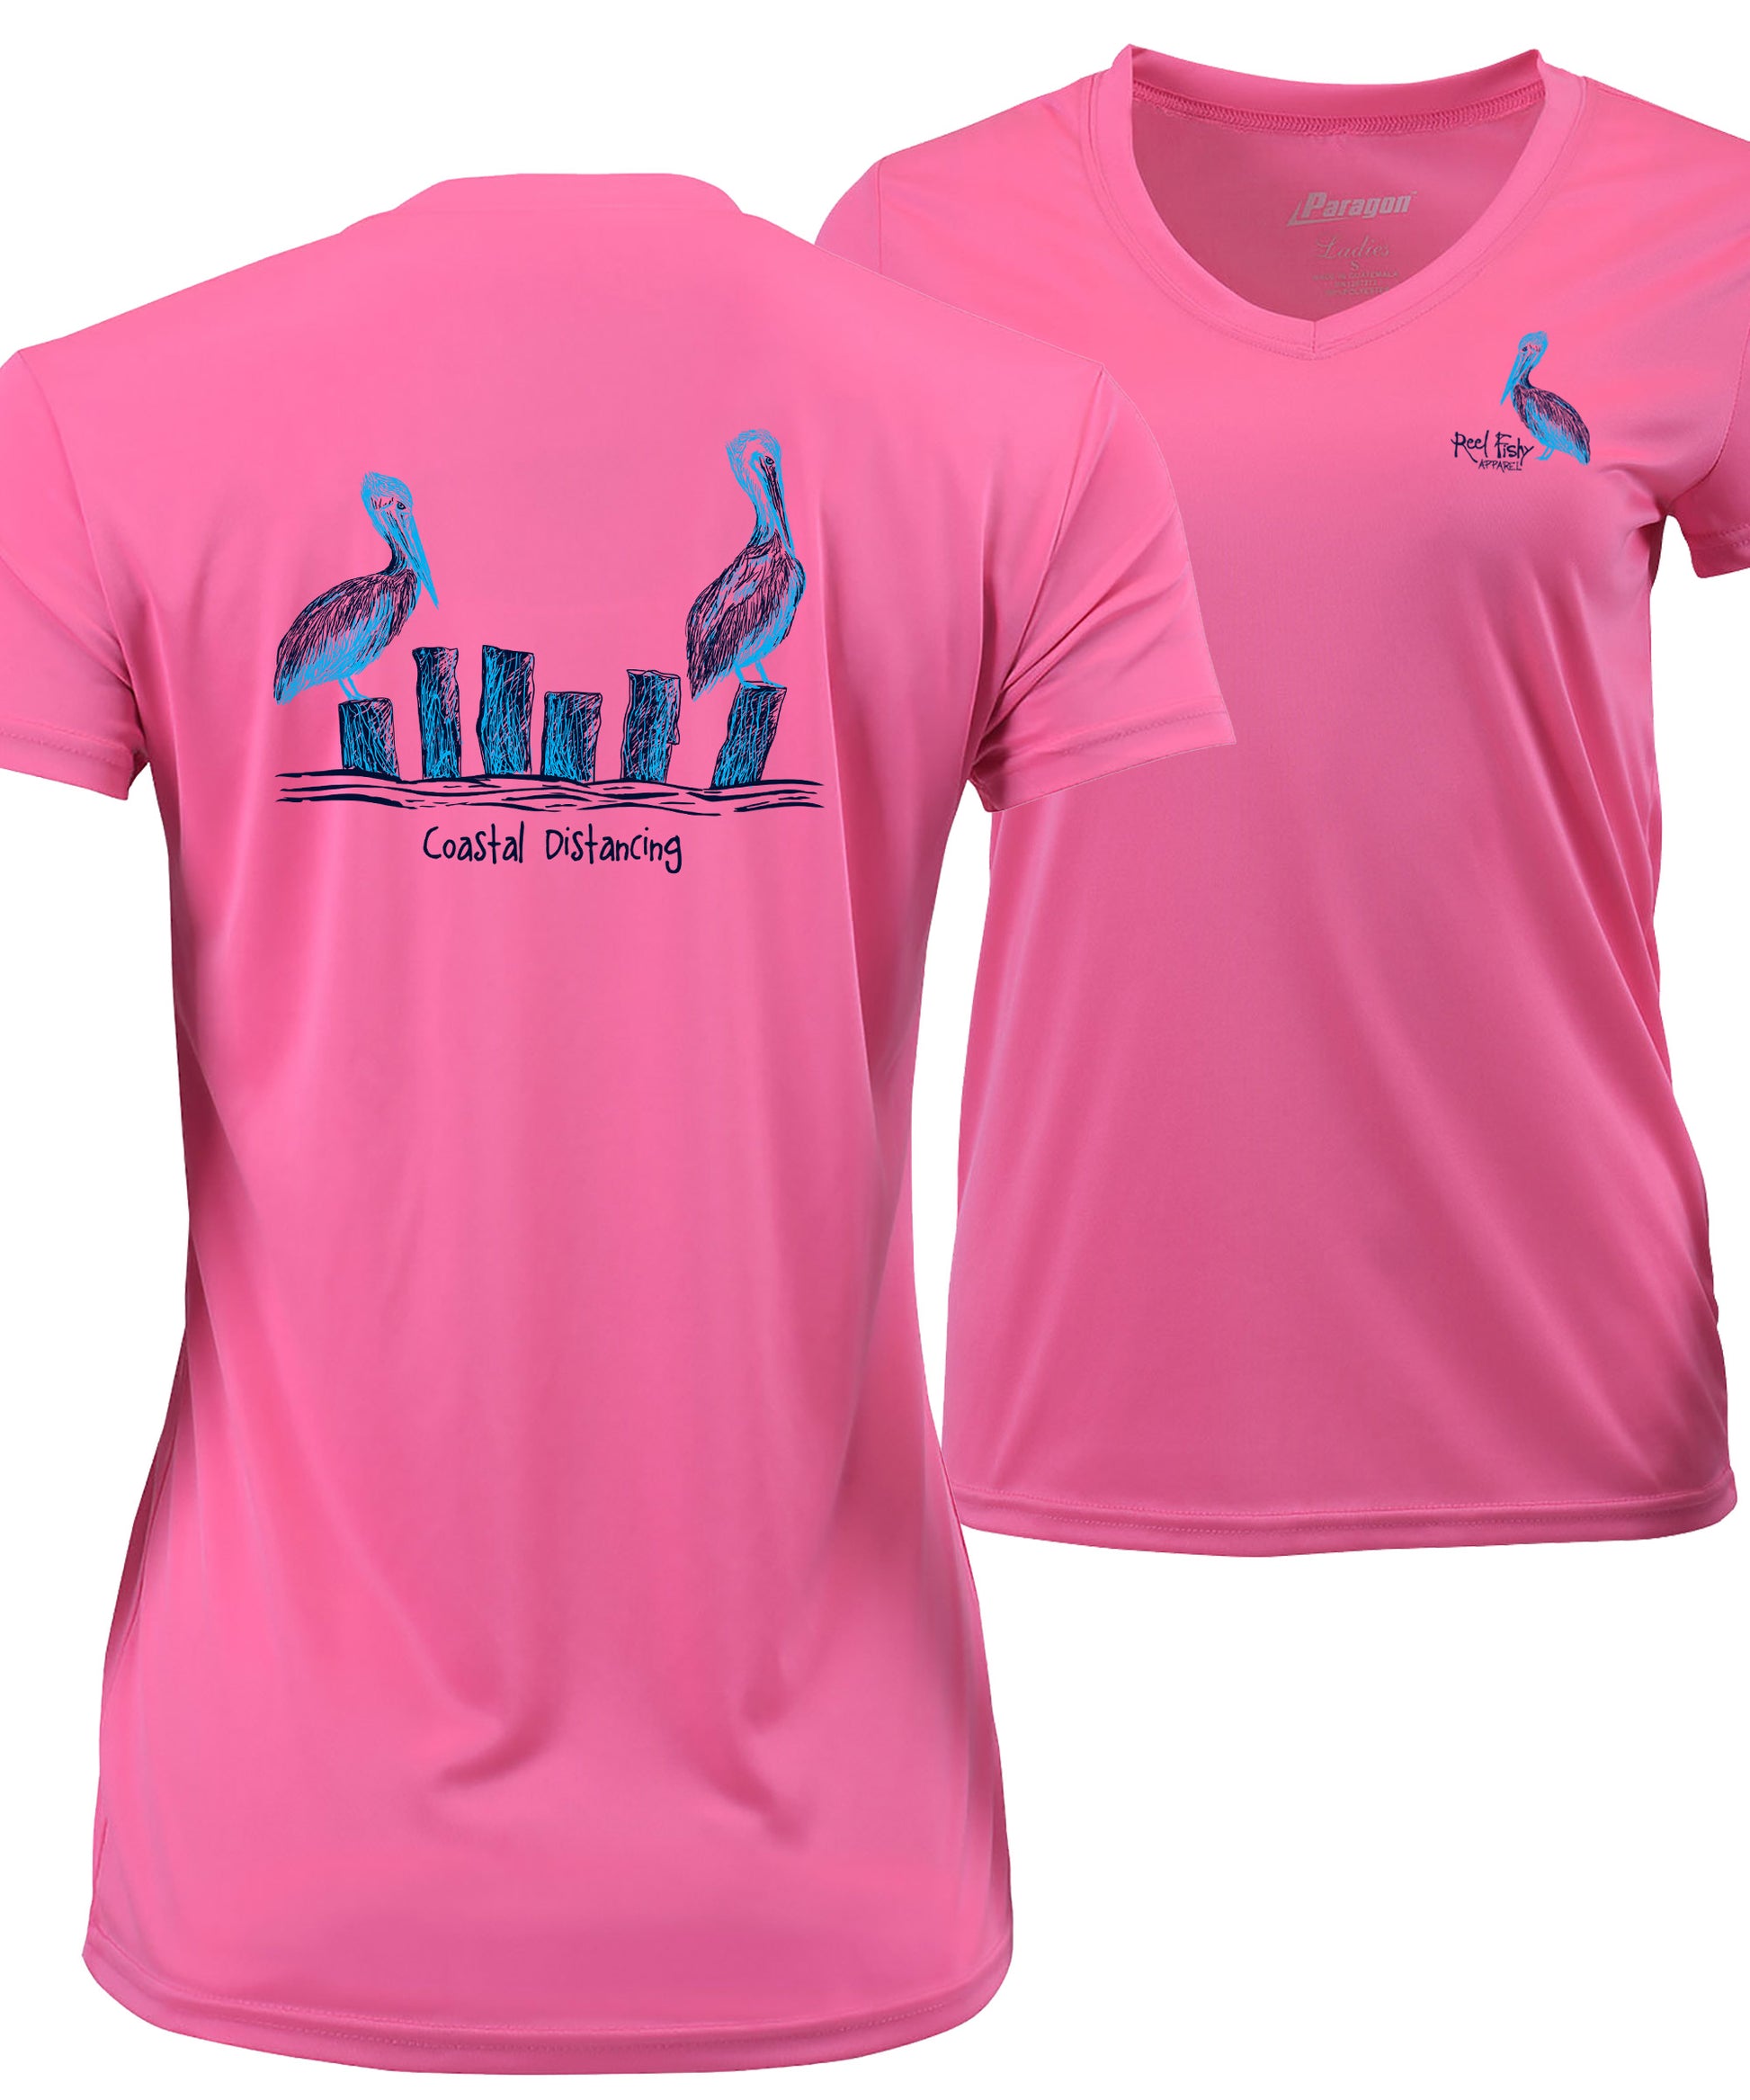 Ladies Pelicans Costal Distancing Performance V-neck Bright Pink Short Sleeve